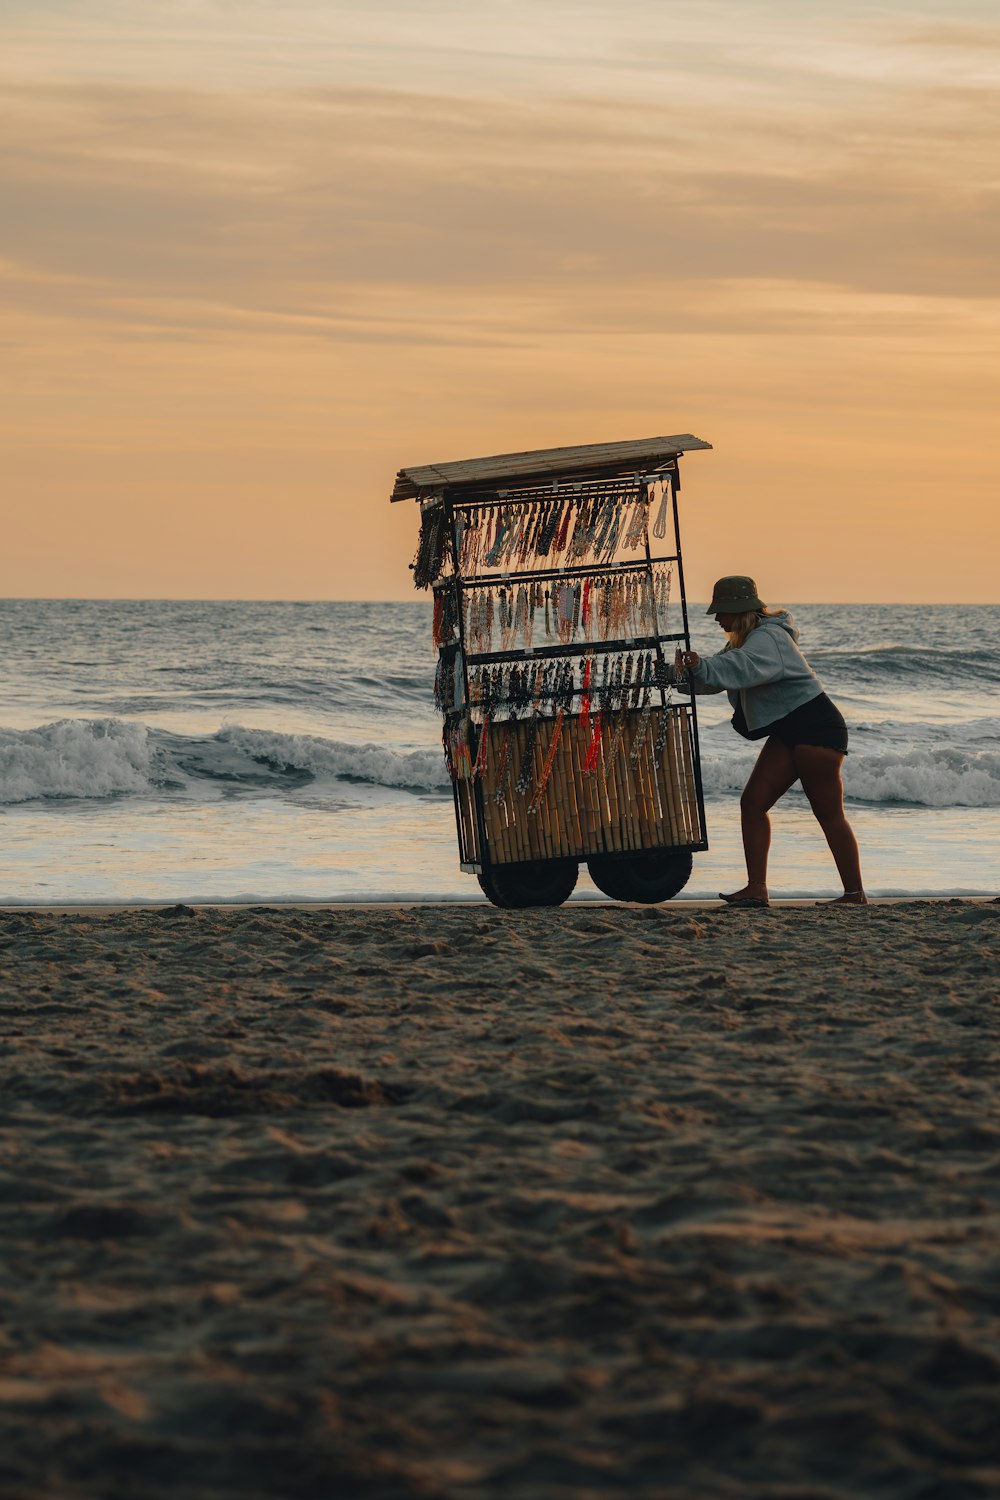 a woman pushing a cart on the beach